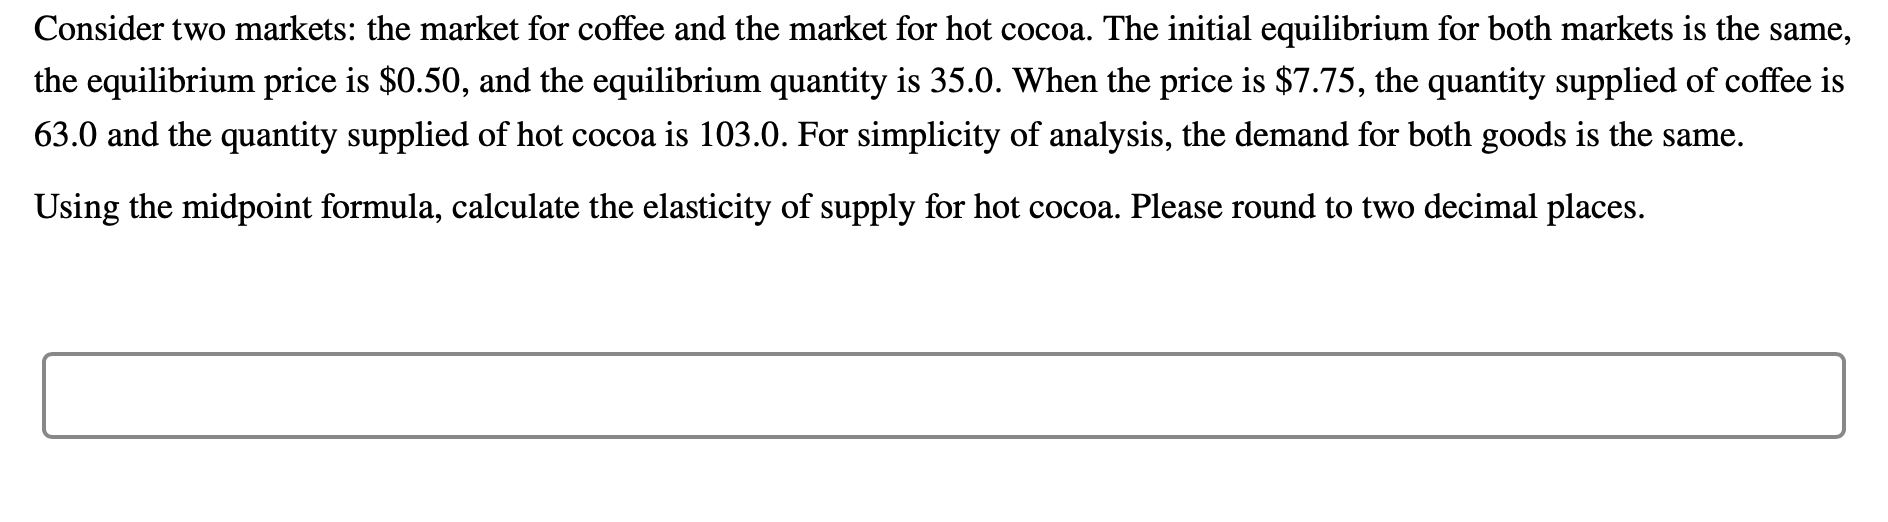 Consider two markets: the market for coffee and the market for hot cocoa. The initial equilibrium for both markets is the same,
the equilibrium price is $0.50, and the equilibrium quantity is 35.0. When the price is $7.75, the quantity supplied of coffee is
63.0 and the quantity supplied of hot cocoa is 103.0. For simplicity of analysis, the demand for both goods is the same.
Using the midpoint formula, calculate the elasticity of supply for hot cocoa. Please round to two decimal places.
